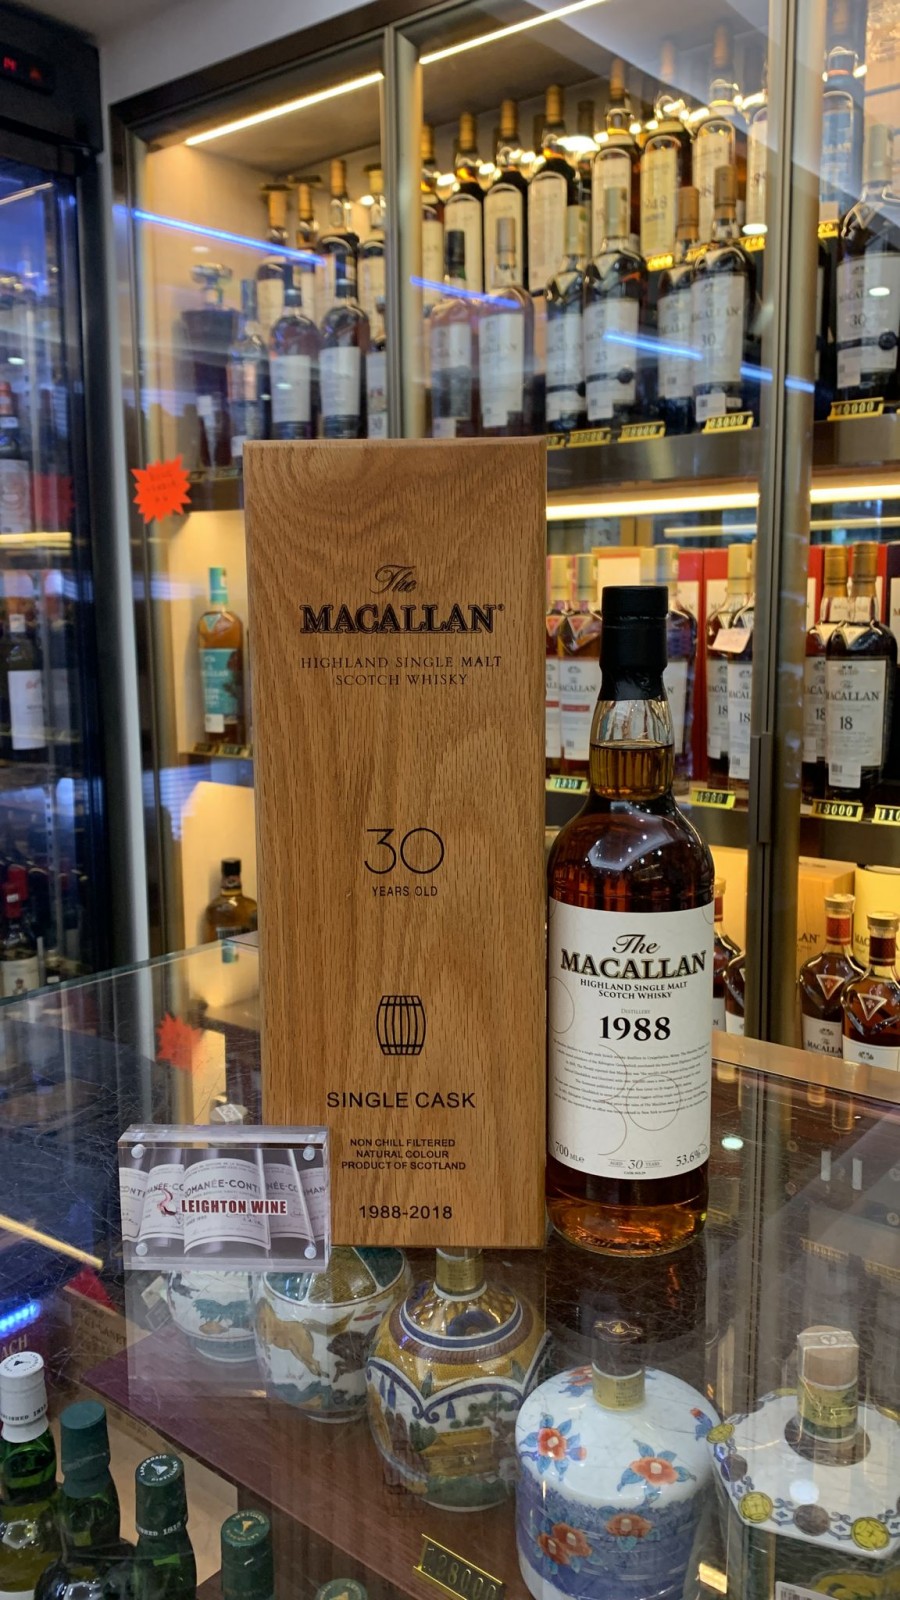 1988 Macallan 30 year old Matured in First filled Sherry cask Cask #29